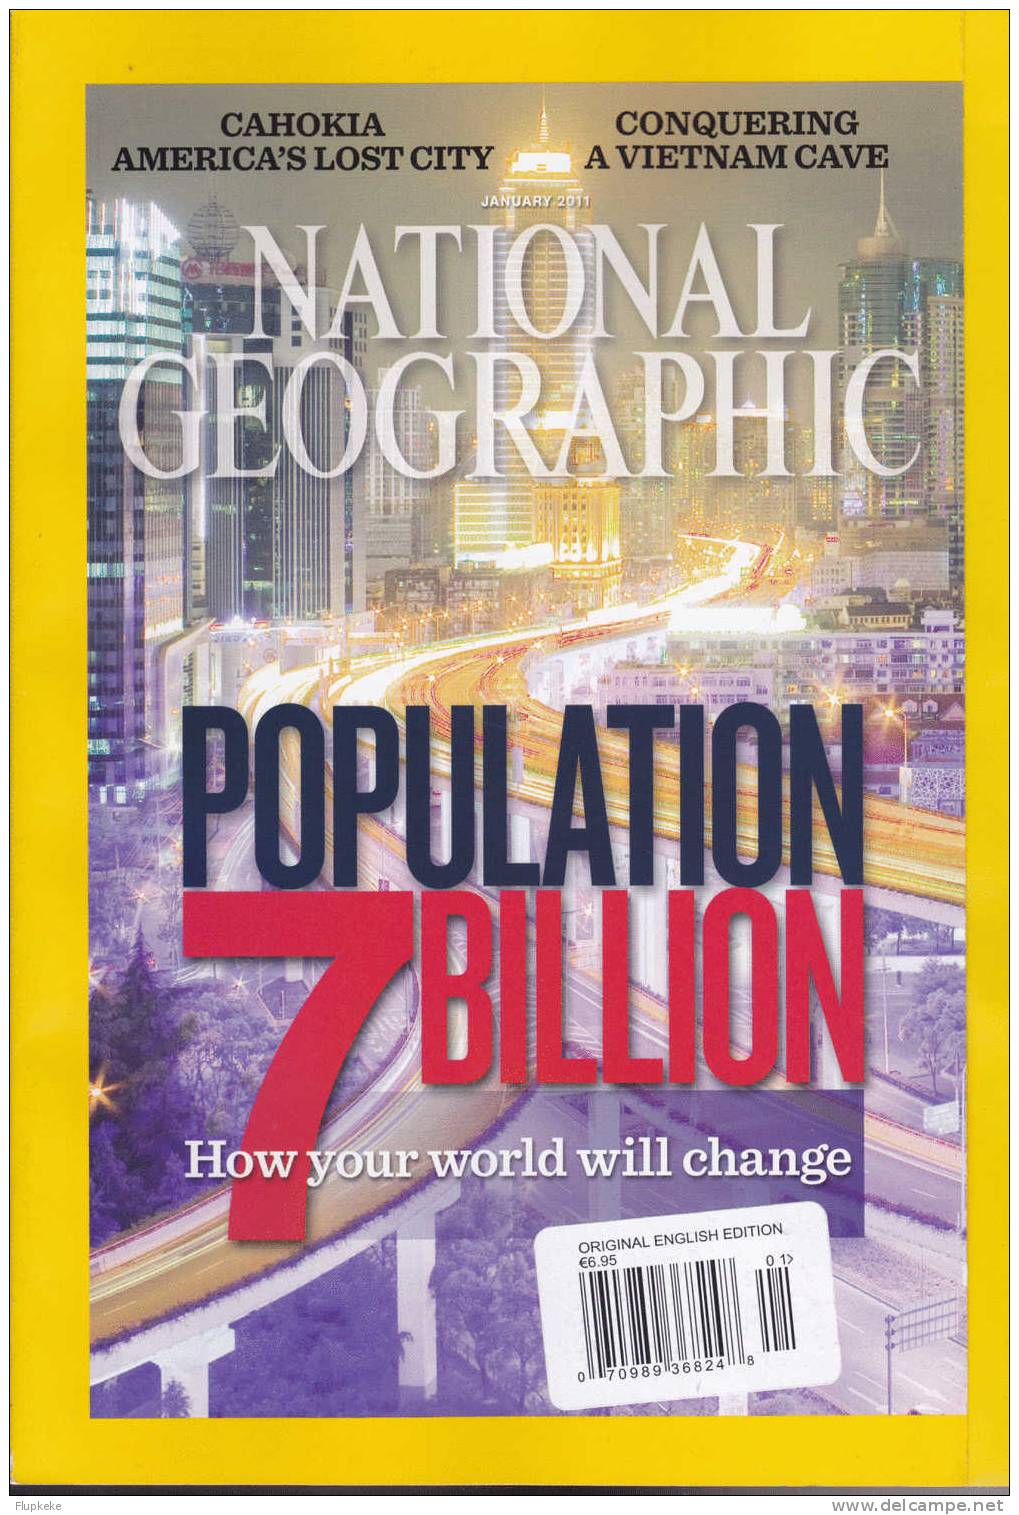 National Geographic U.S. January 2011 V219 No1 Population 7 Billion How Your World Will Change - Voyage/ Exploration